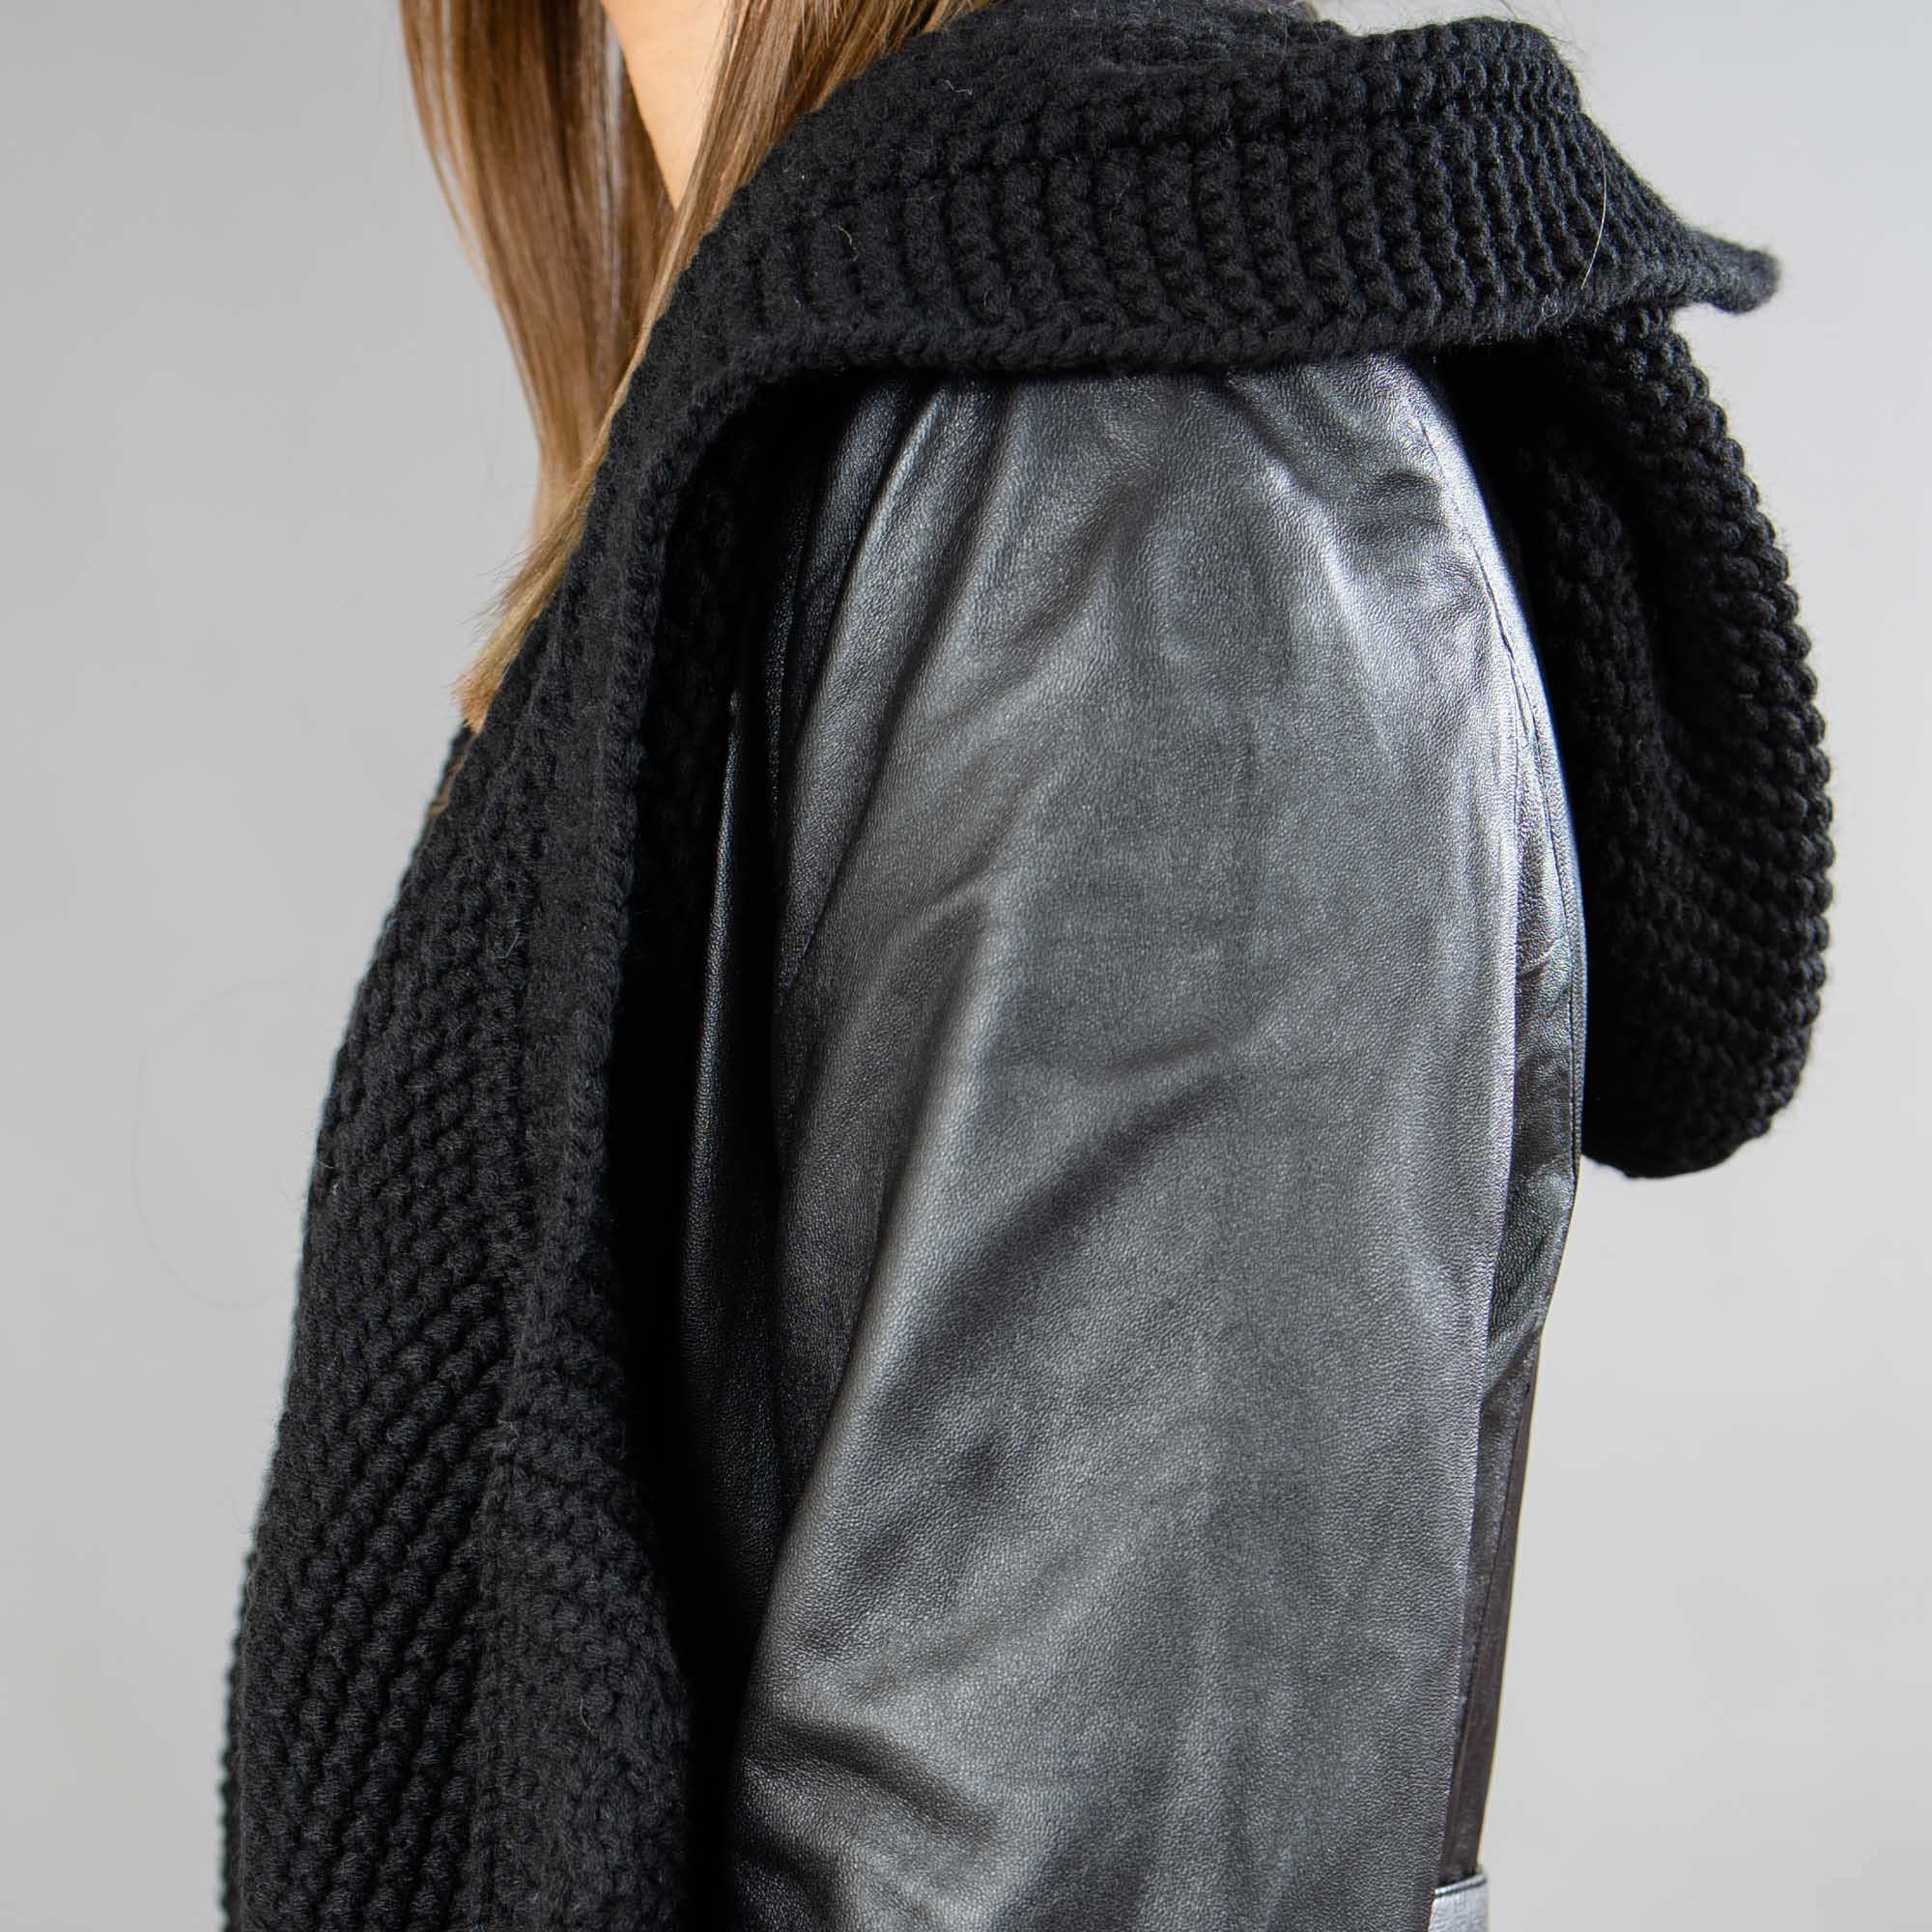 Leather jacket with a hood in black color